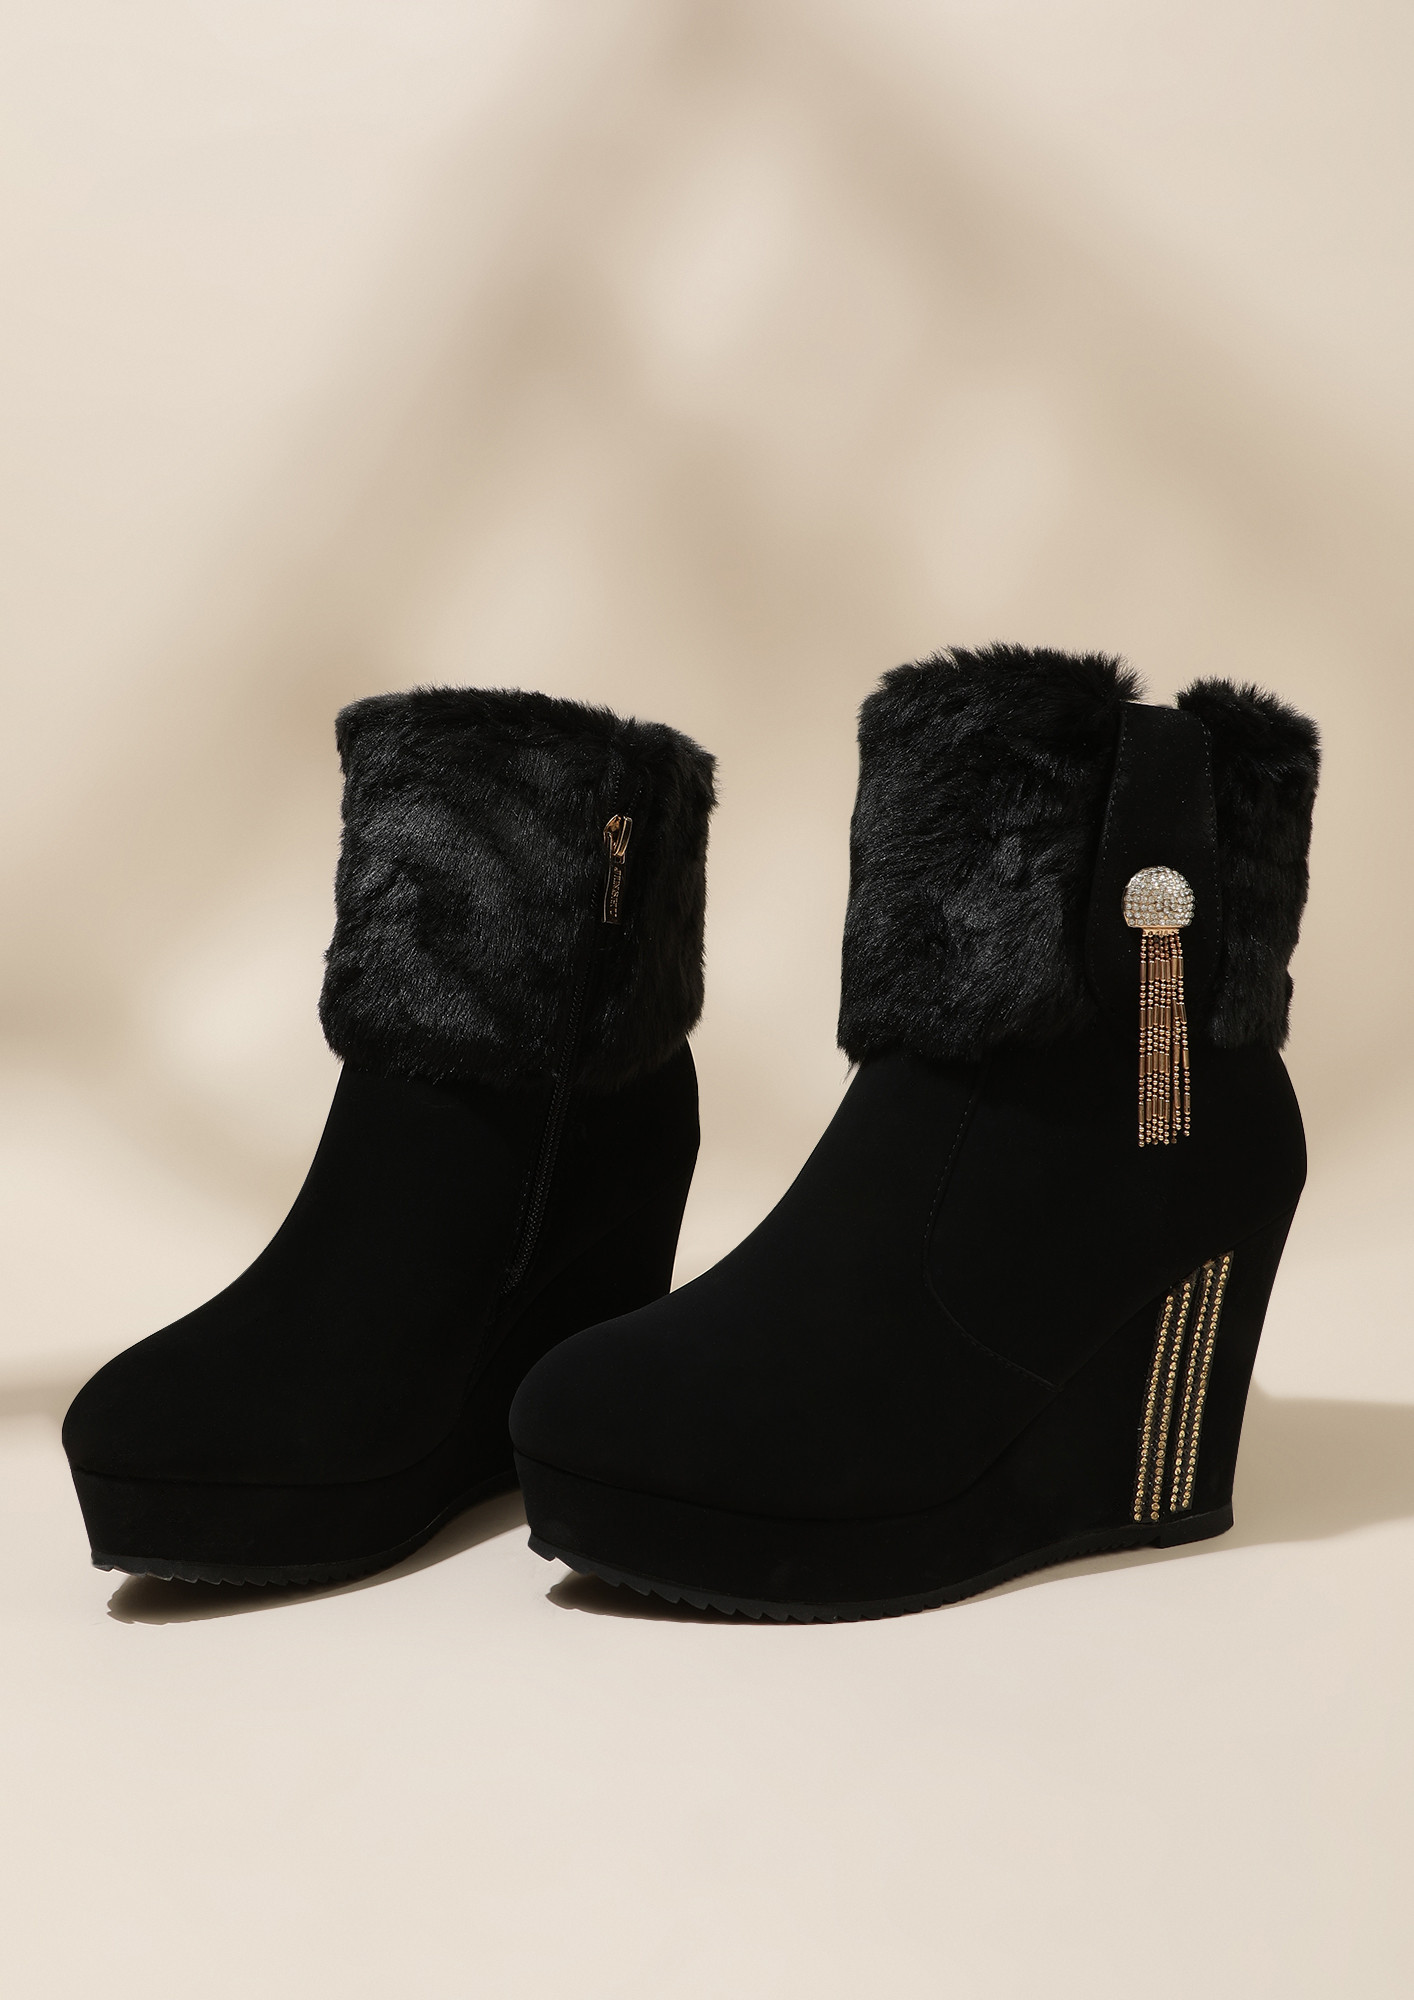 THE GLAM QUEEN BLACK BOOTS